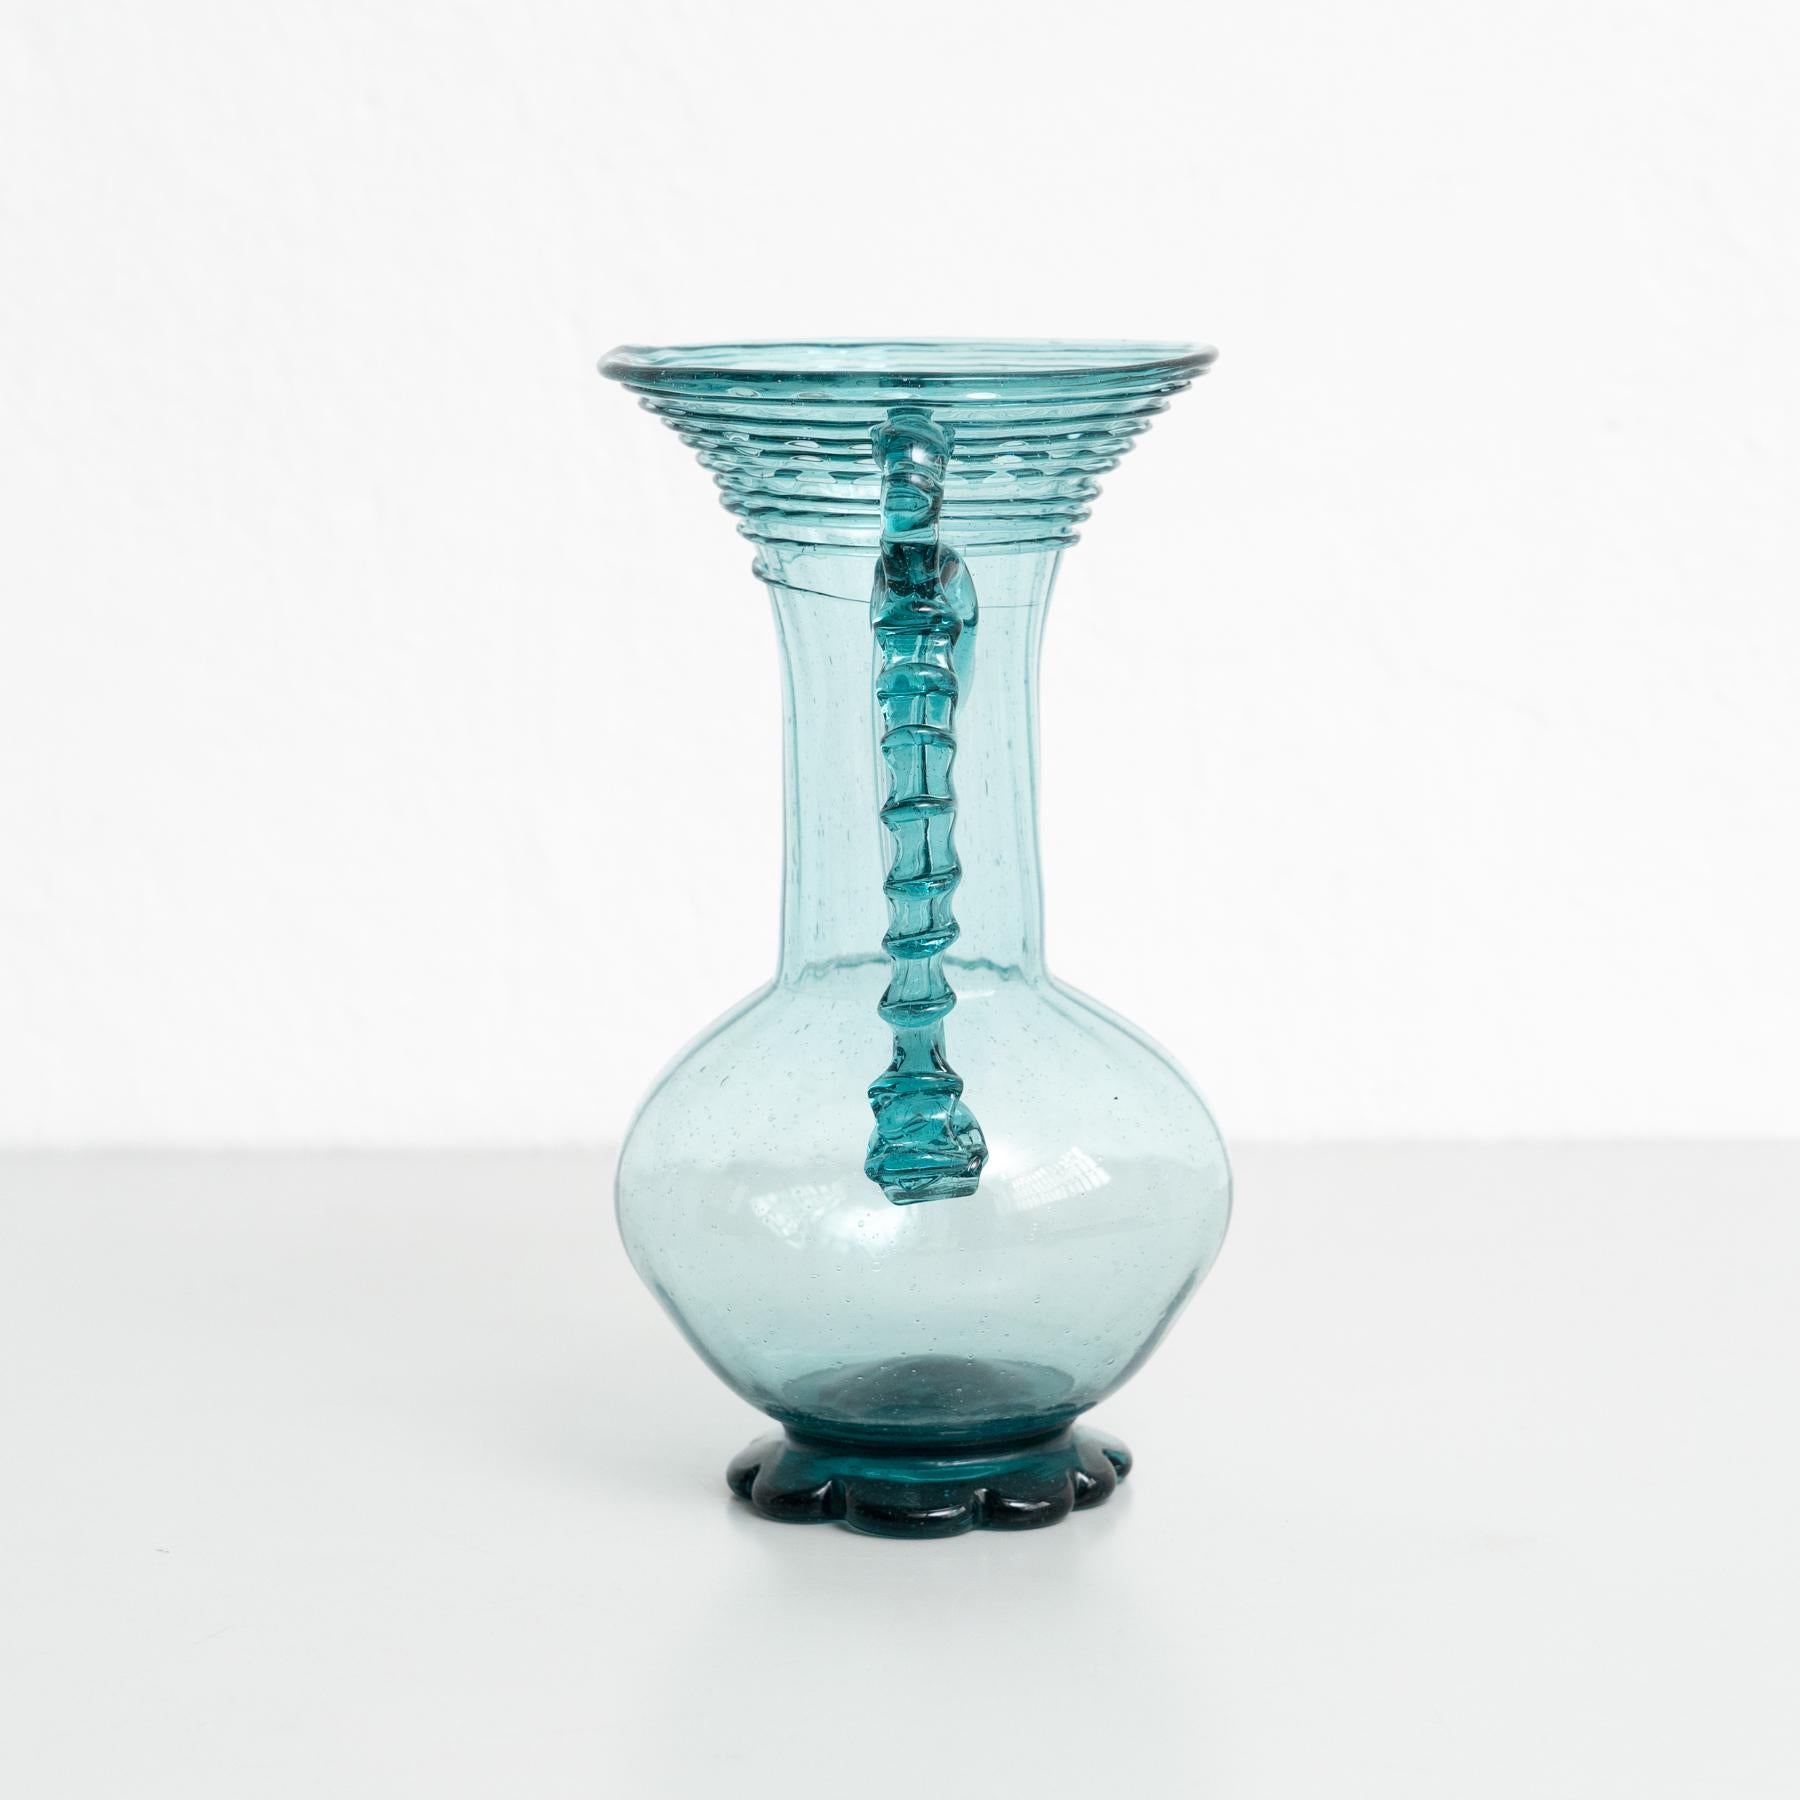 Exceptional Blown Glass Vase - Early XXth Century - Spanish Craftsmanship For Sale 4